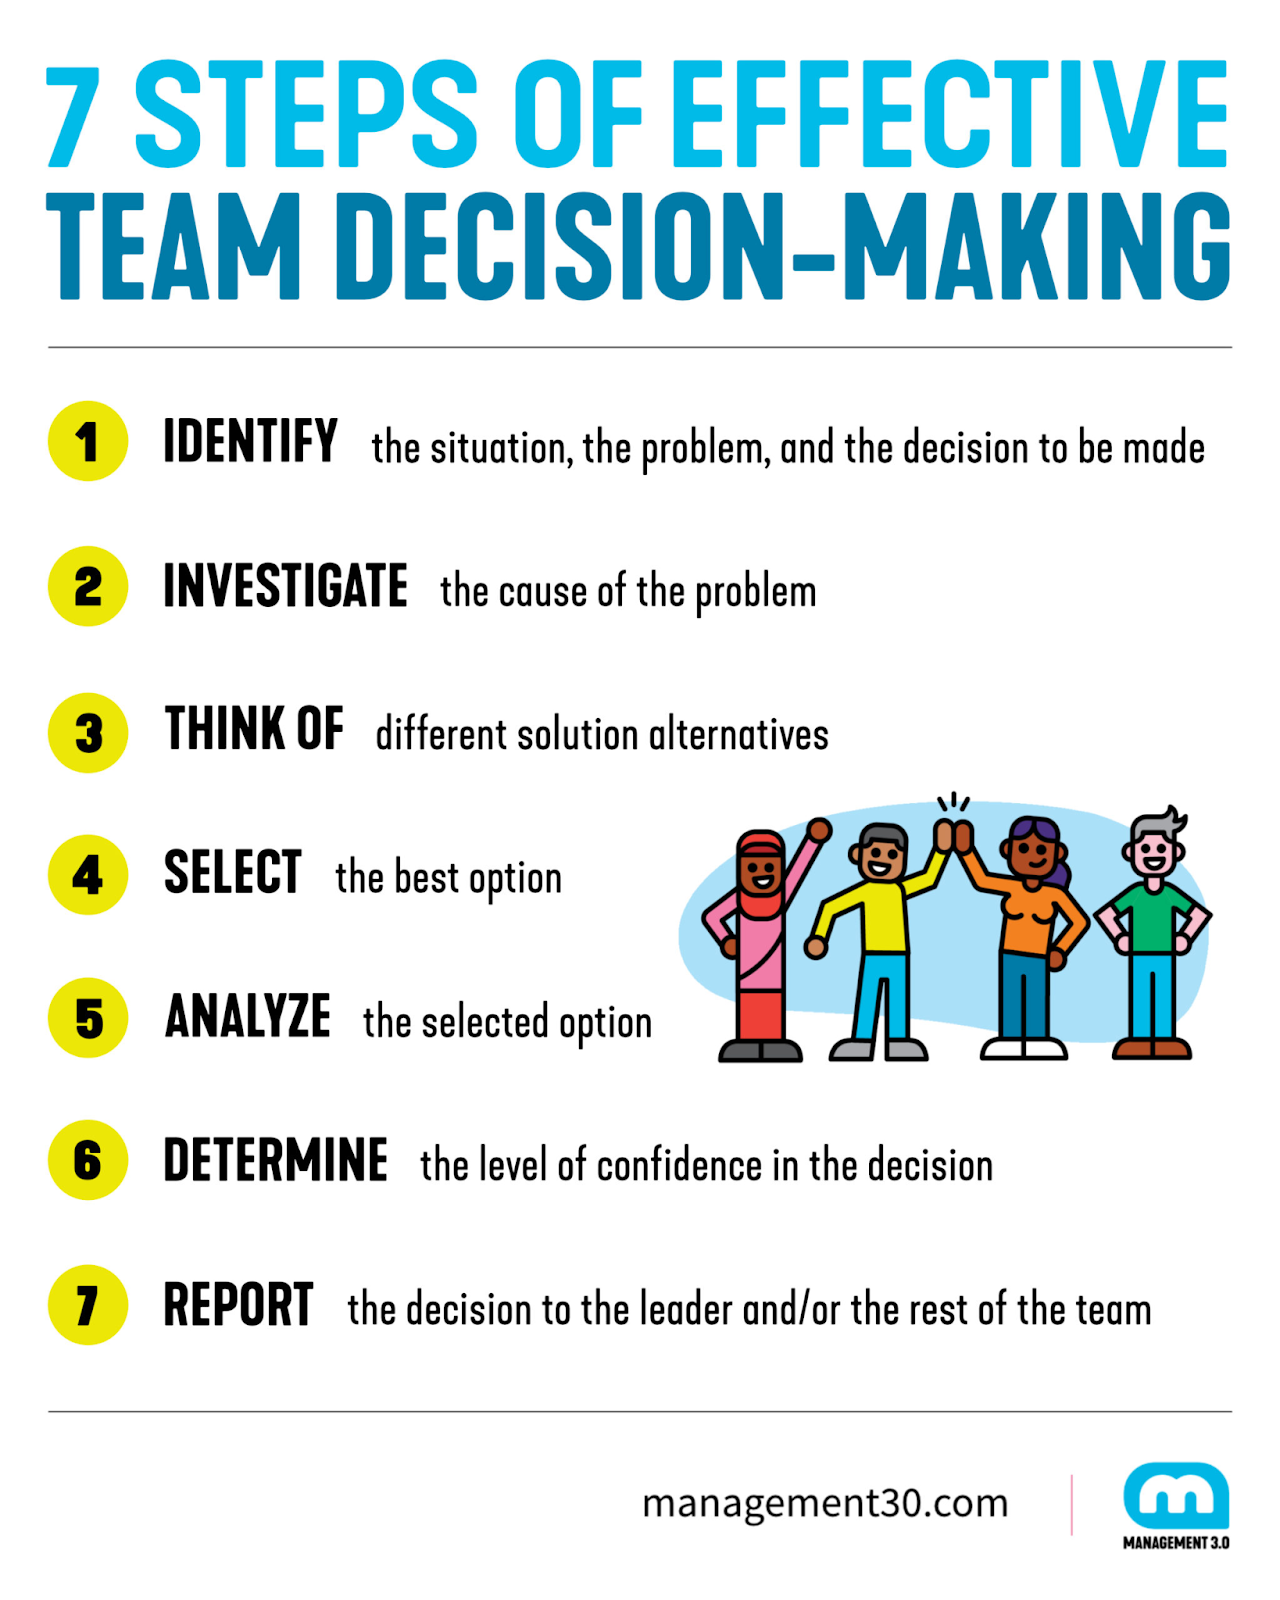 1. Identify the situation, problem, and decision to be made 2. Investigate the course of the problem 3. Think of different solution alternatives 4. Select the best option 5. Analyze the selected option 6. Determine the level of confidence in the decision 7. Report the decision to the leader and/or rest of the team